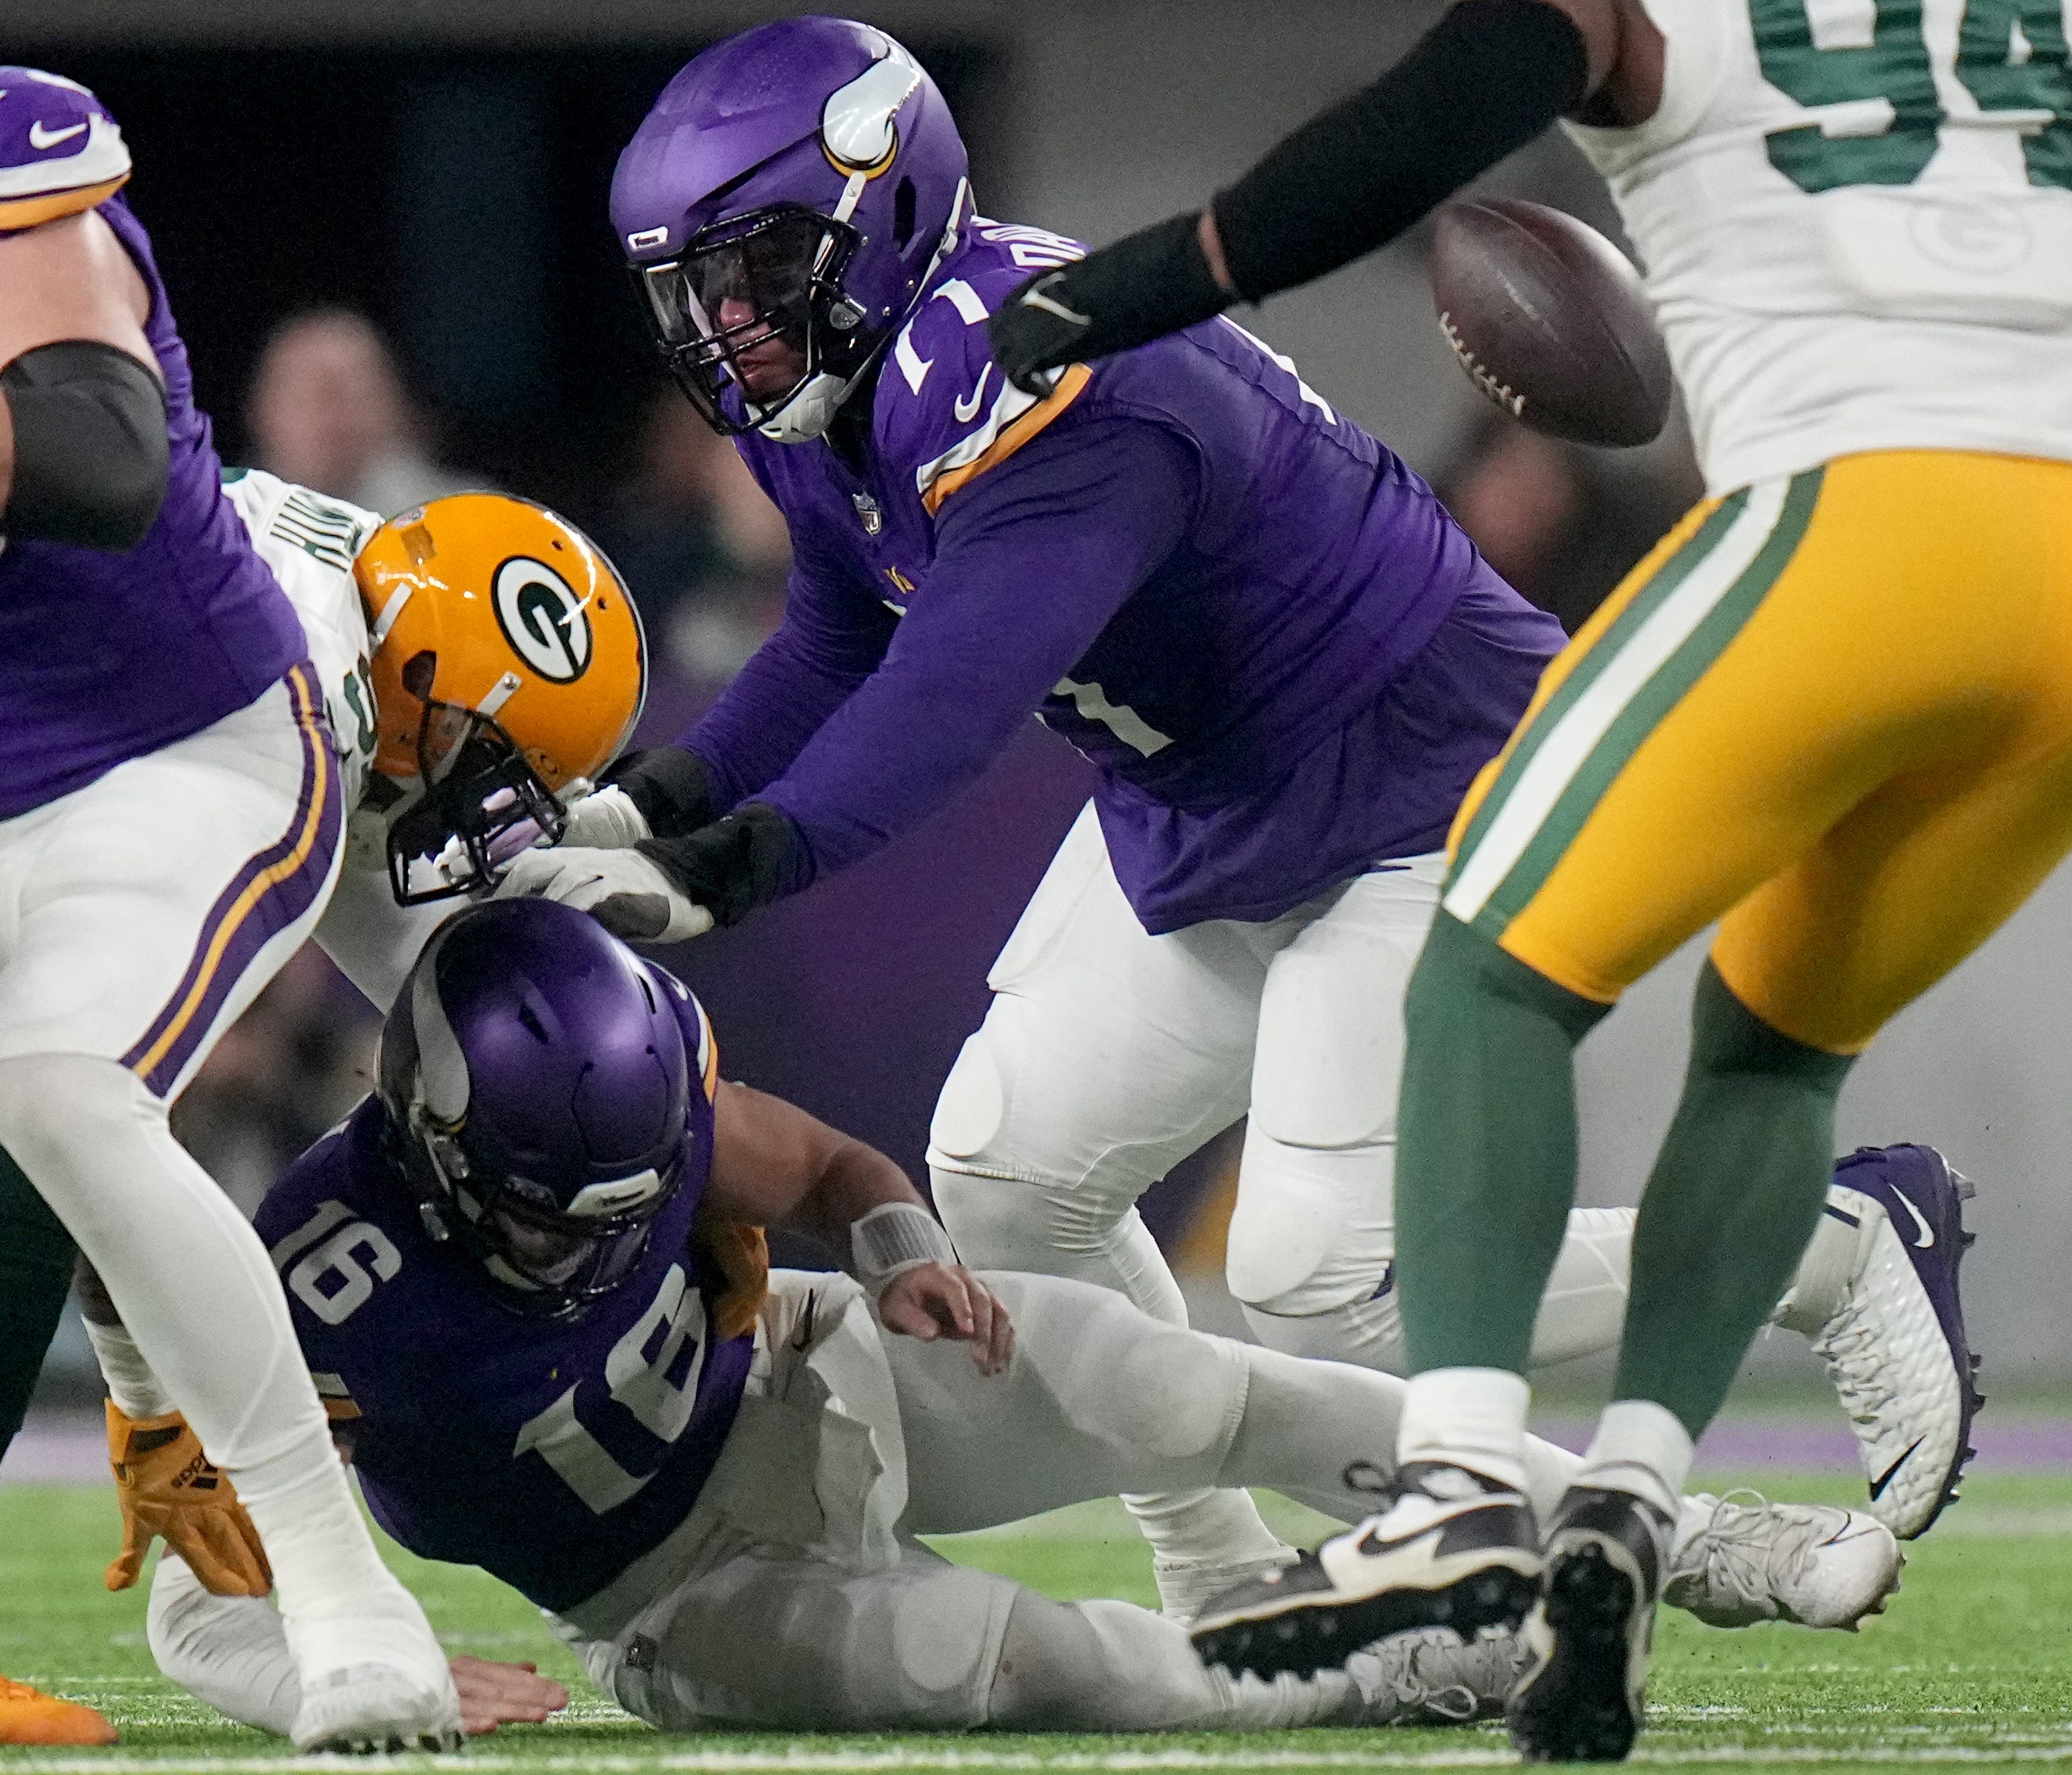 Minnesota Vikings quarterback Jaren Hall (16) fumbles the ball during the second quarter of their game against the Green Bay Packers Sunday, Dec. 31, 2023, at U.S. Bank Stadium in Minneapolis, Minnesota. The Packers recovered the ball.